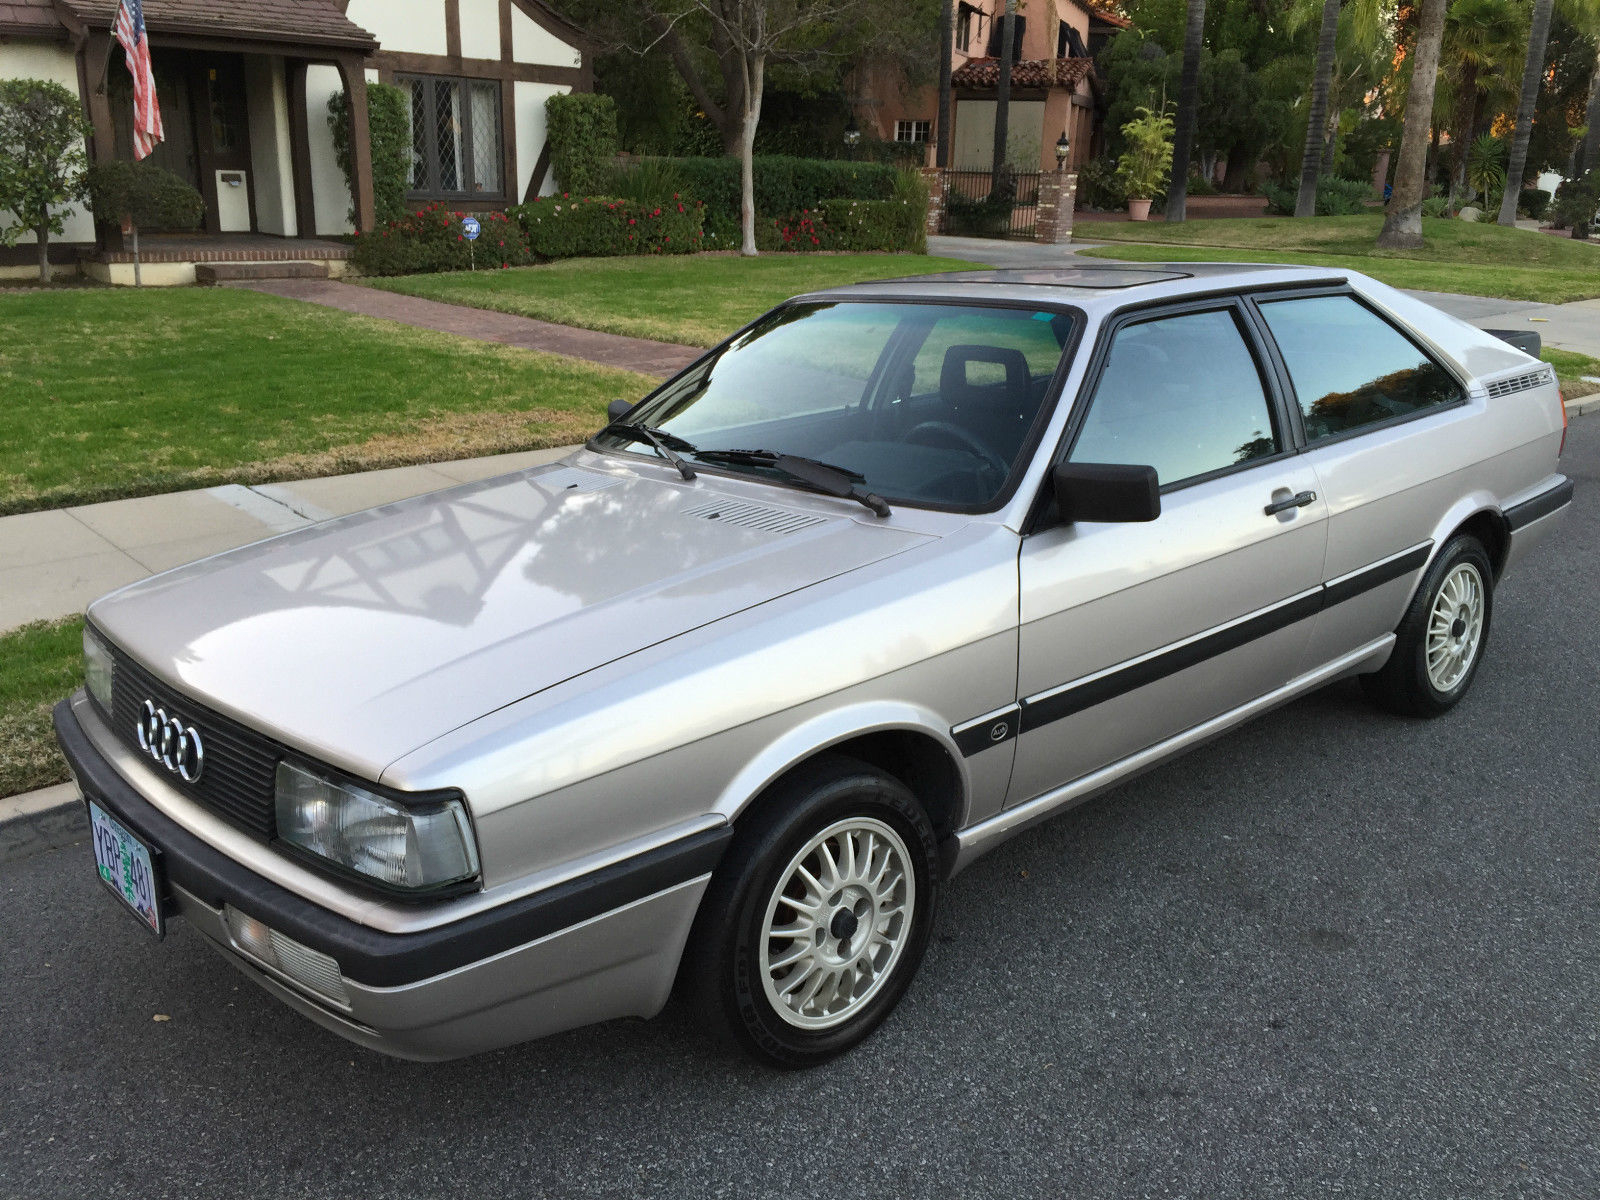 AMAZING 1985 AUDI GT COUPE for sale in Covina California United States for sale photos 